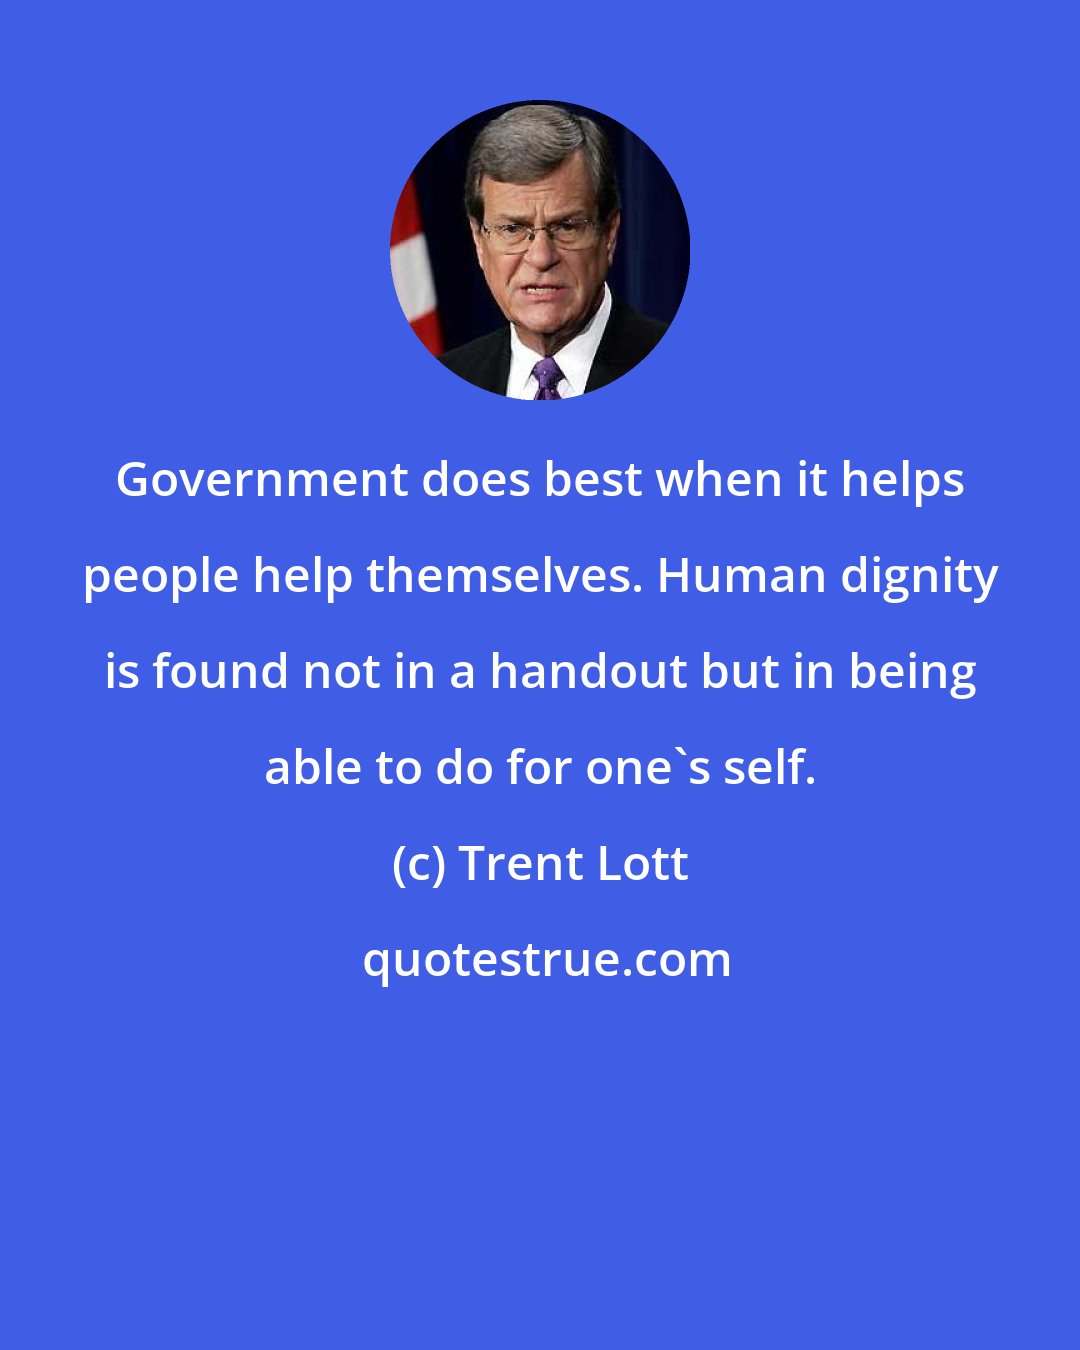 Trent Lott: Government does best when it helps people help themselves. Human dignity is found not in a handout but in being able to do for one's self.